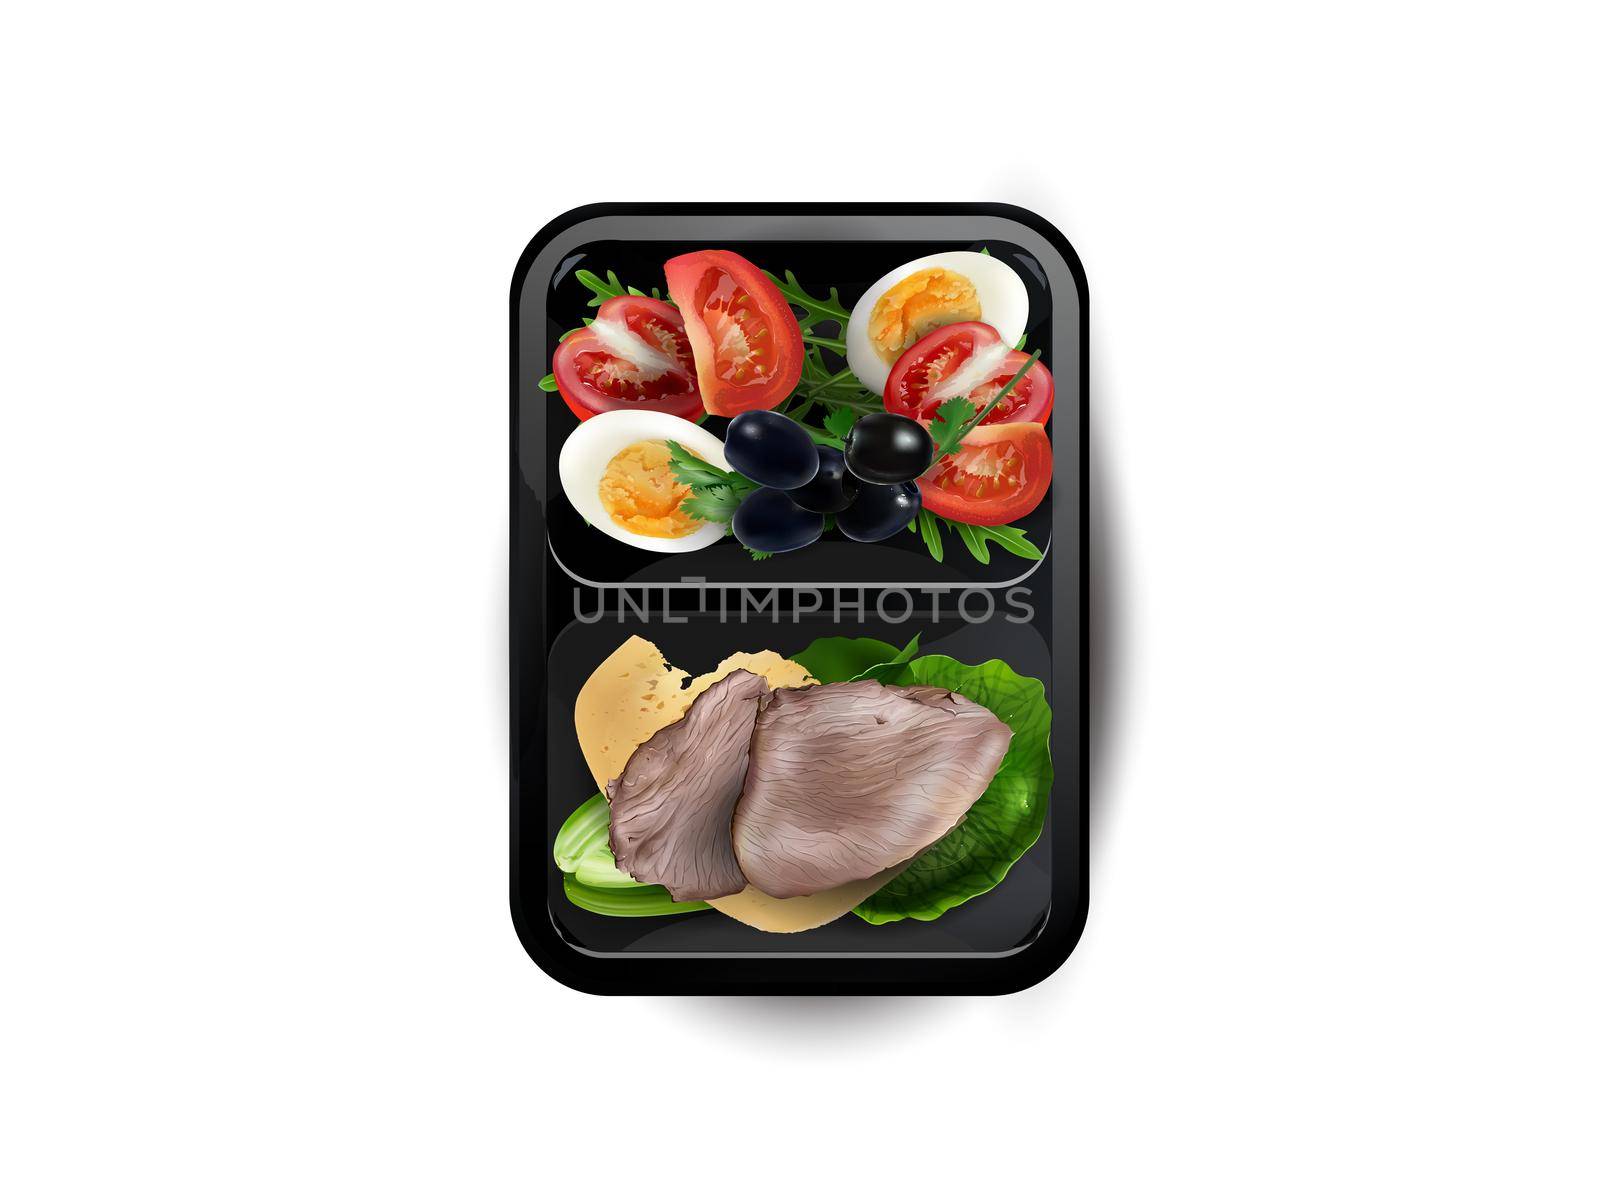 Boiled meat with egg, cheese and vegetables in a lunchbox. by ConceptCafe